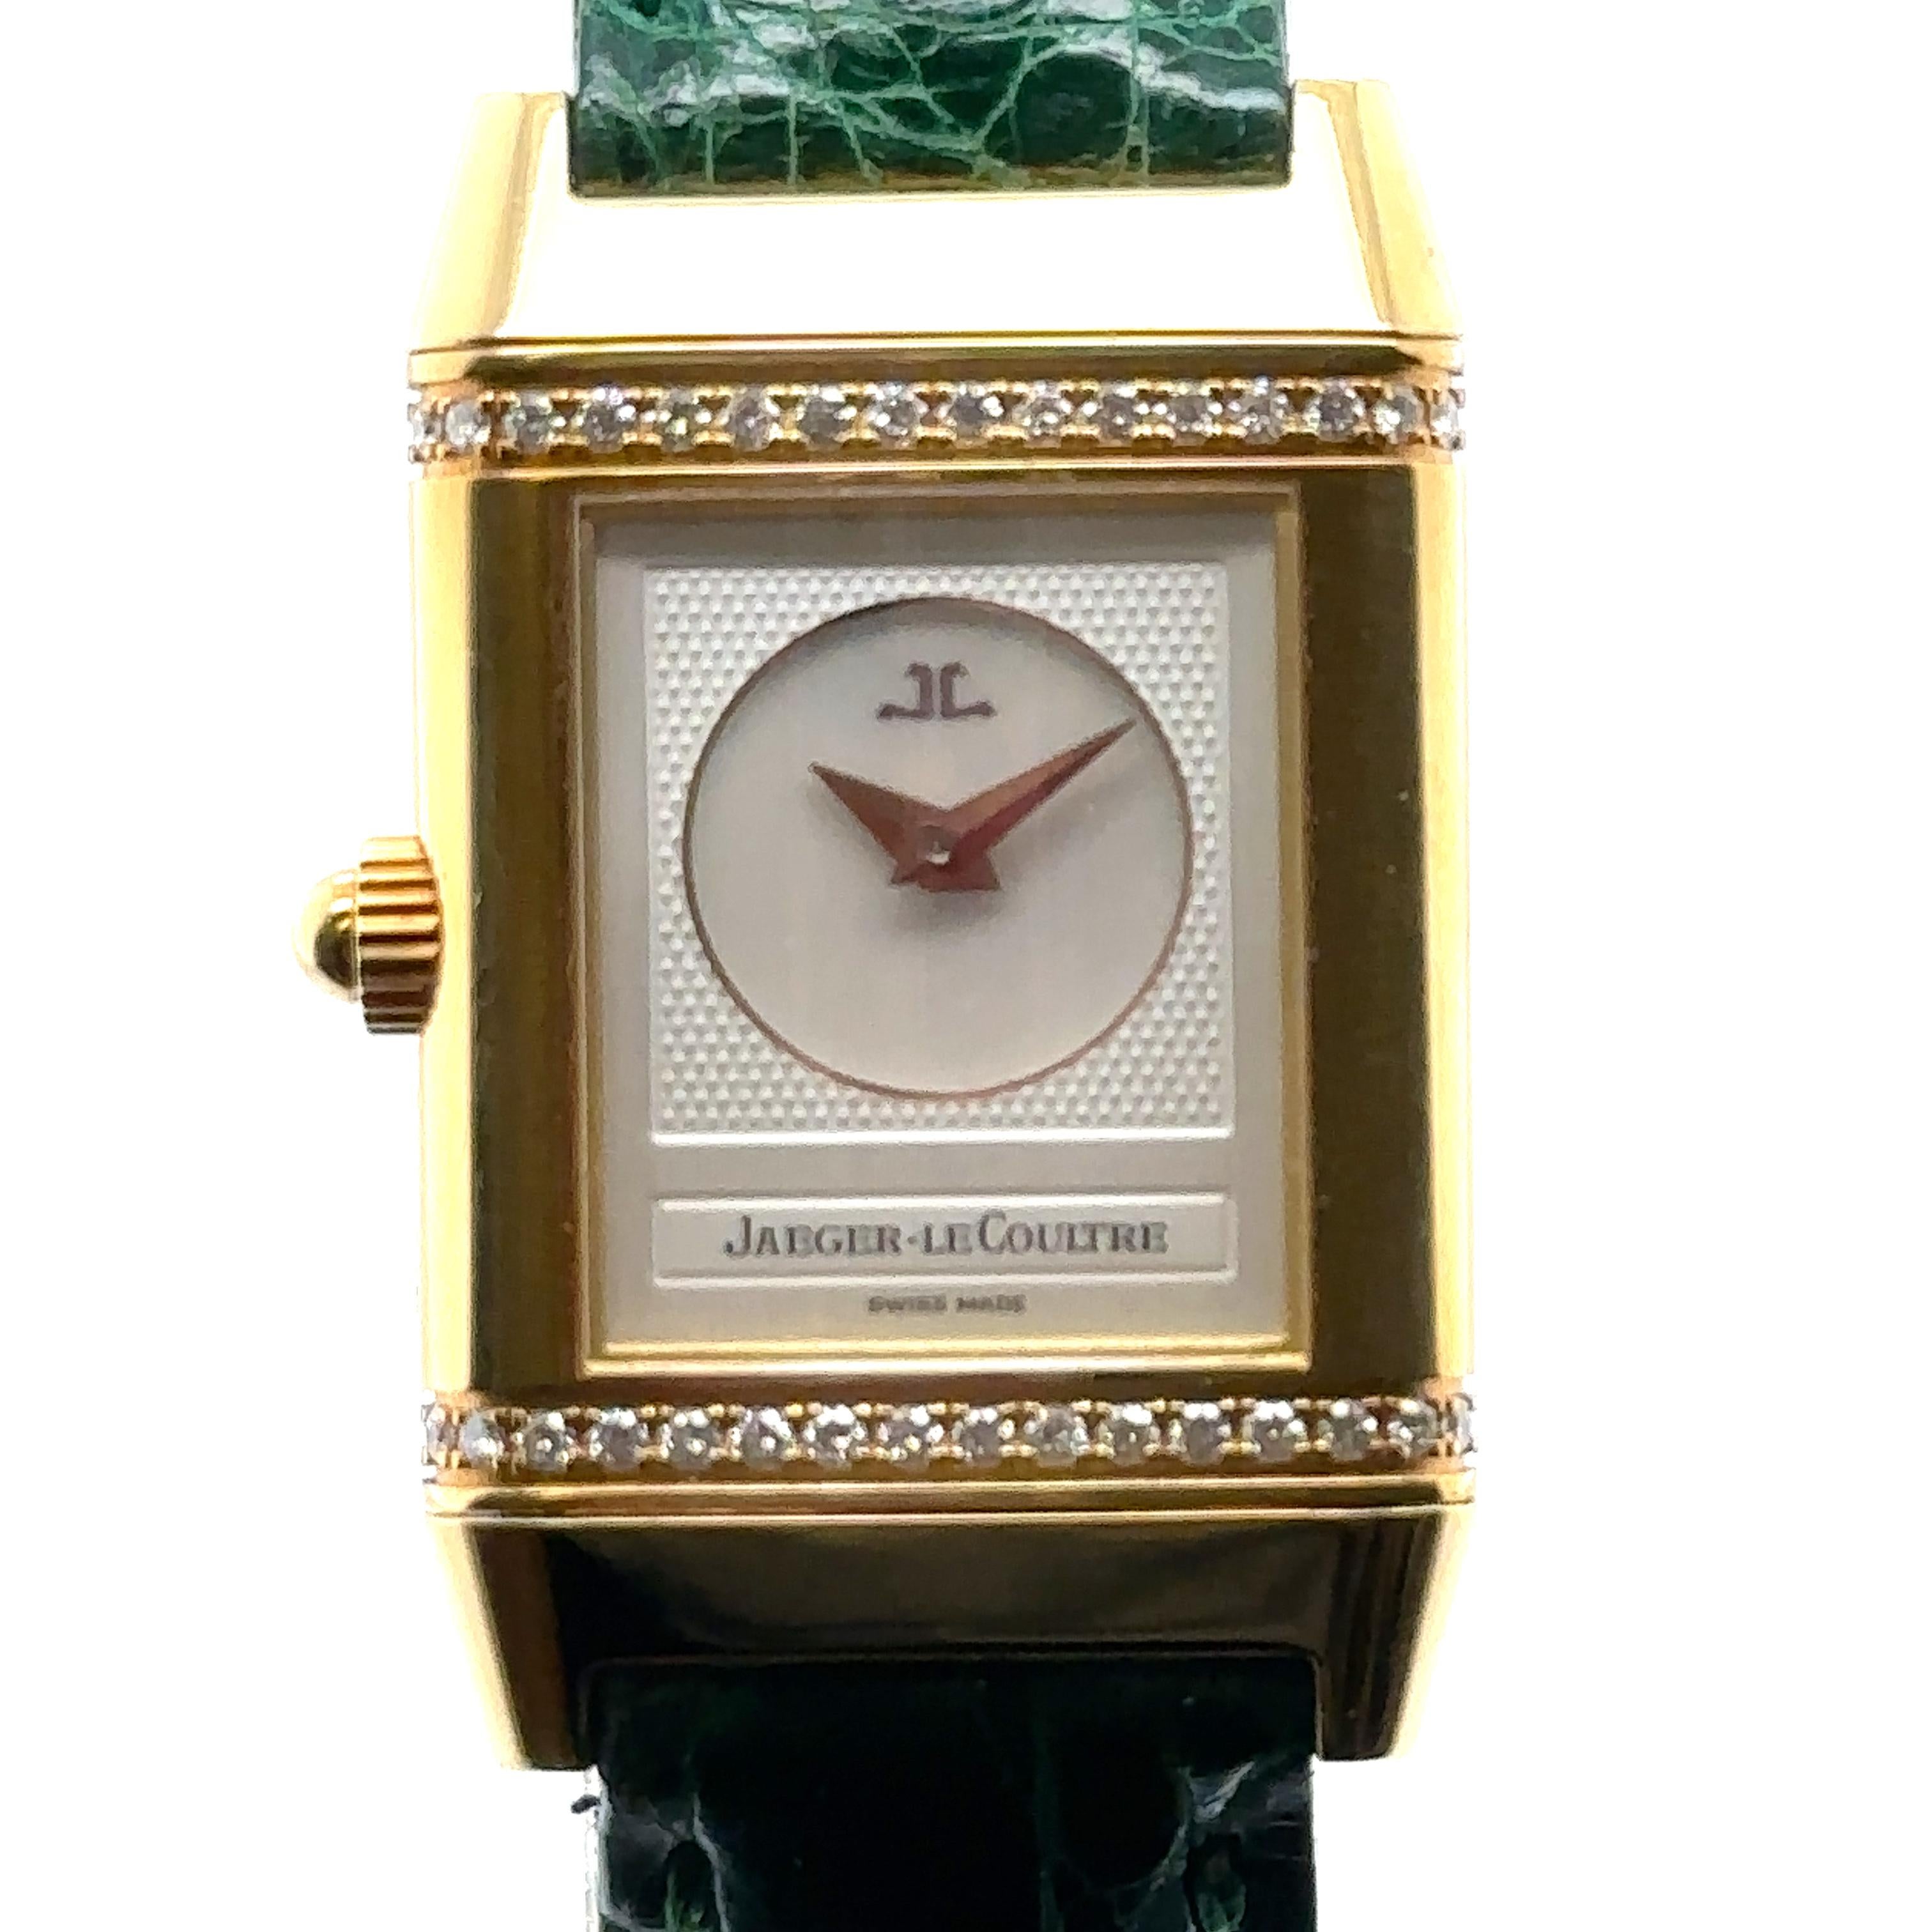 Jaeger Le-Coultre Reverso Ref 266.1.44
Yellow gold case and bezel.
Silver coloured front dial with black hands and arabic numerals.
Reverse dial is mother of pearl with gold coloured hands and case has row of diamonds top and bottom of case.
Manual